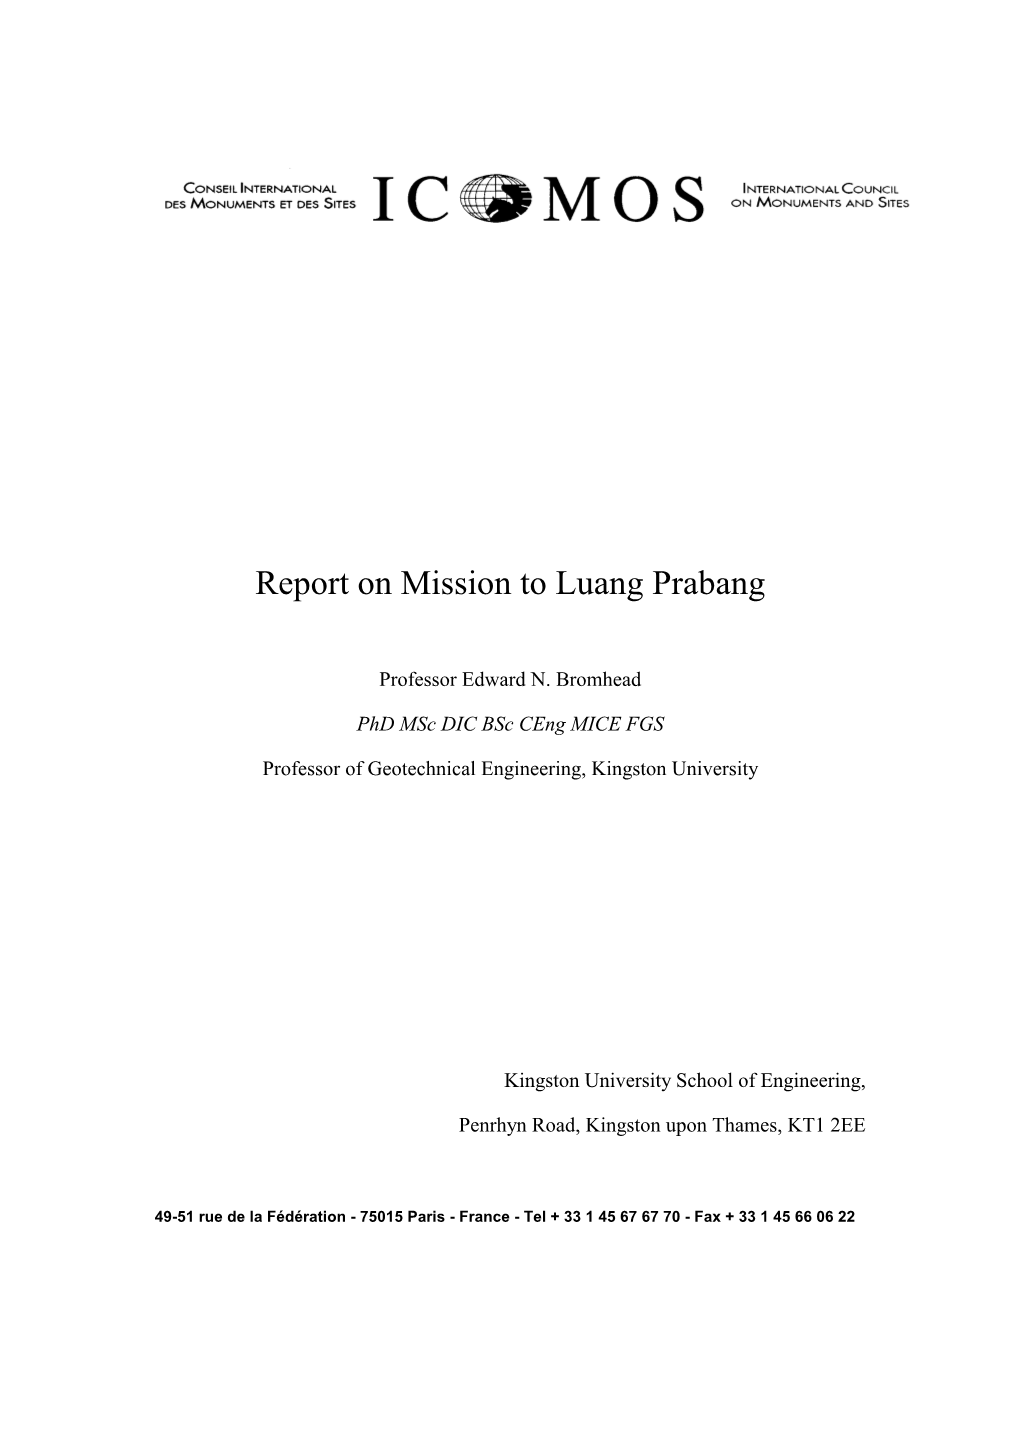 Report on Mission to Luang Prabang